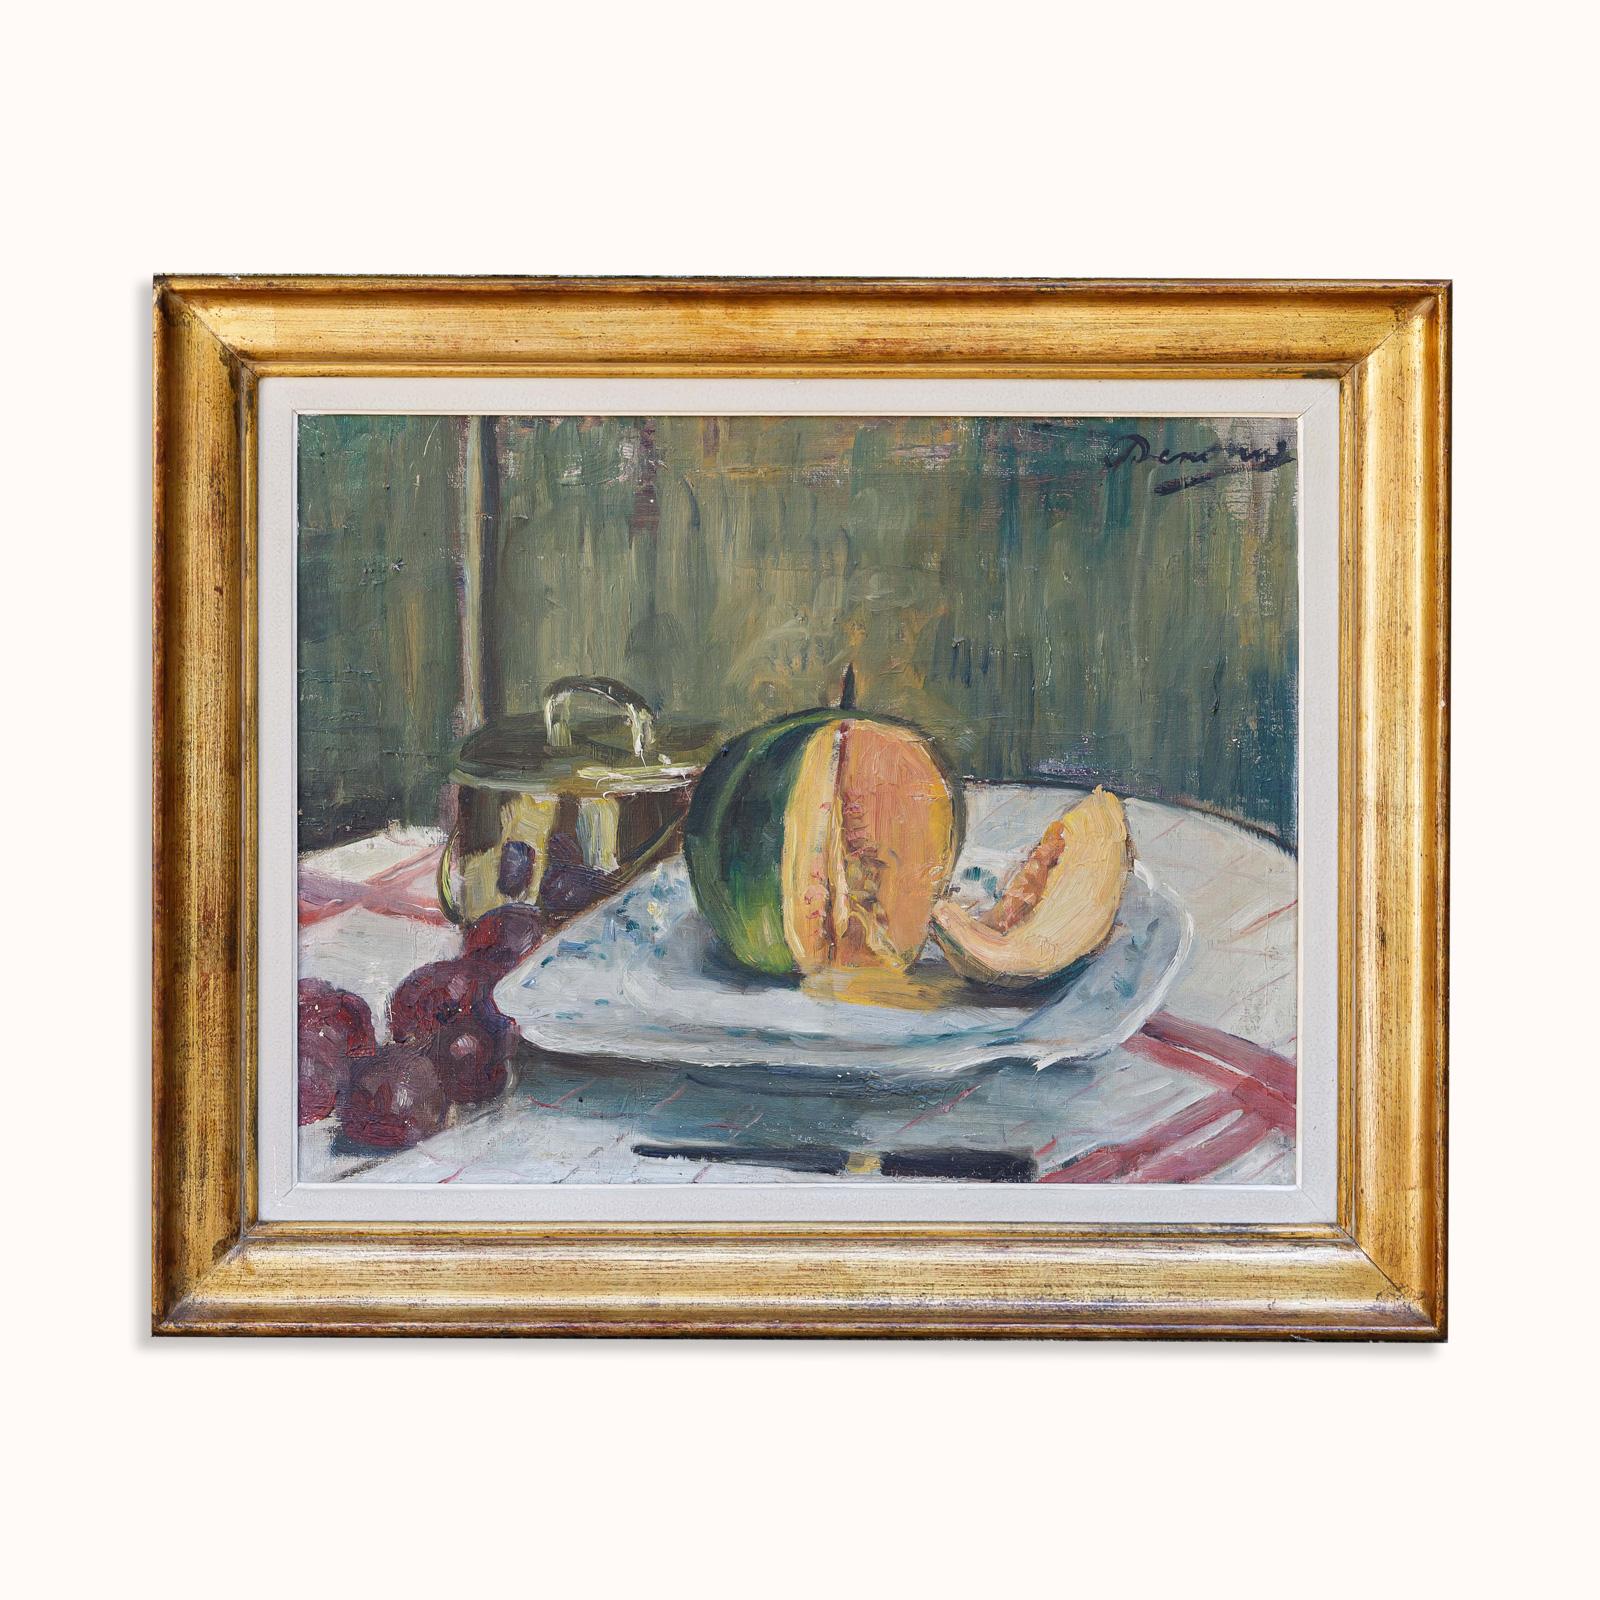 Gorgeous set of two early 20th C still life paintings by Alexandre ‘Alex’ Denonne (Belgium, 1879-1953): still life “Asparagus and eggs” and still life “Melon”.

Oil on canvas, both paintings are signed “Denonne”.

About the painter:
Alexandre